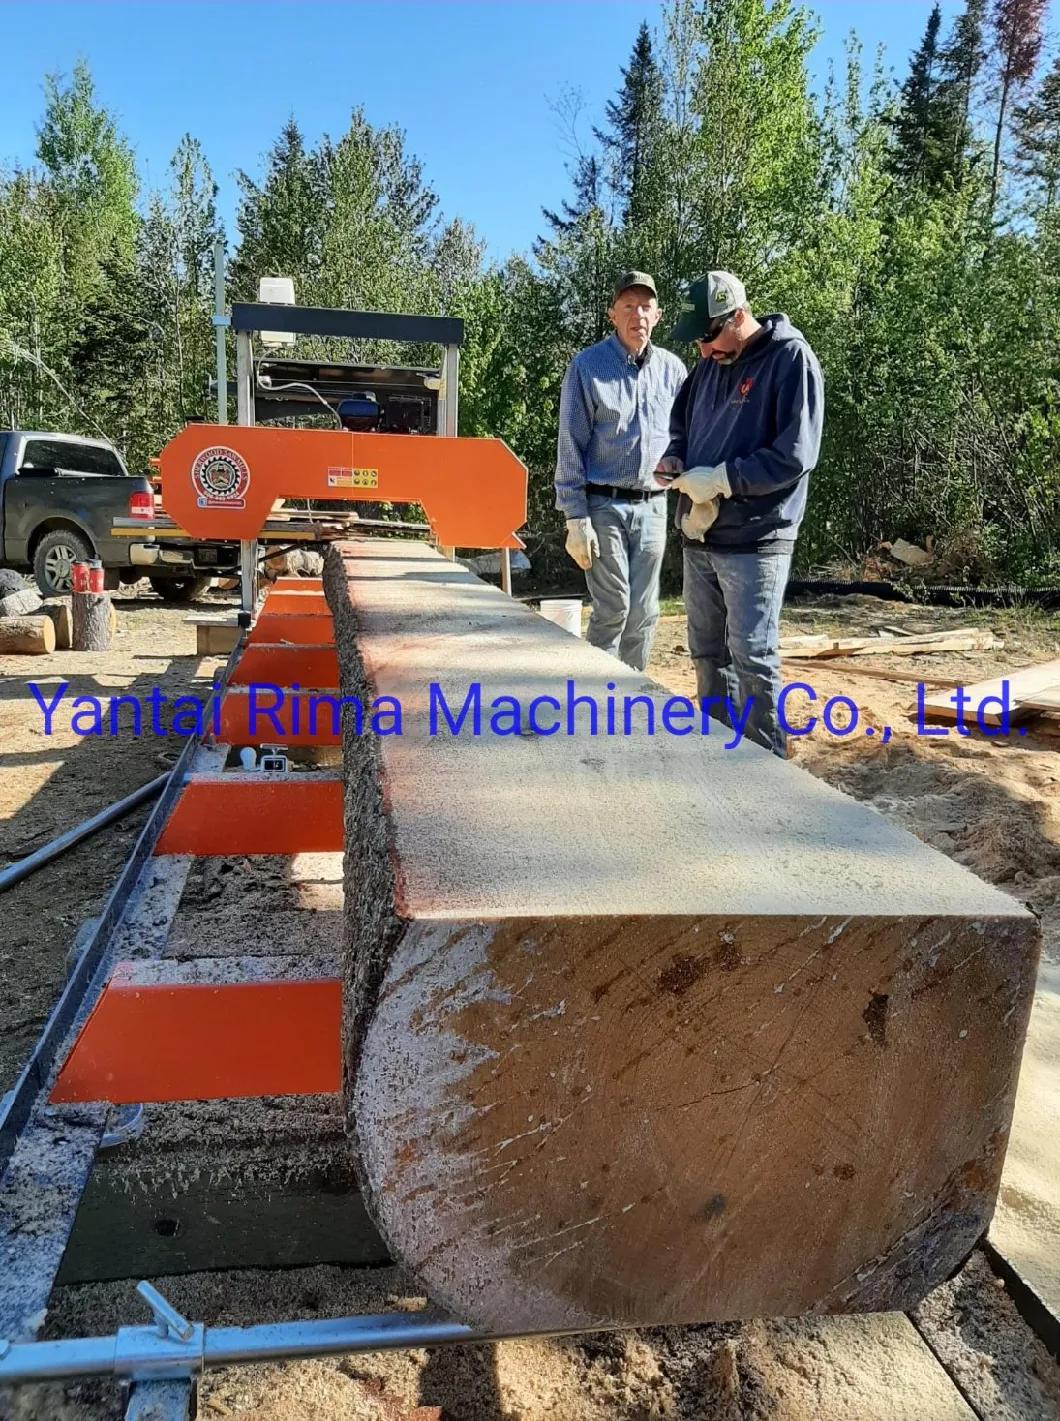 Wood Sawmill with Trailer Portable Mobile Horizontal Bandsaw